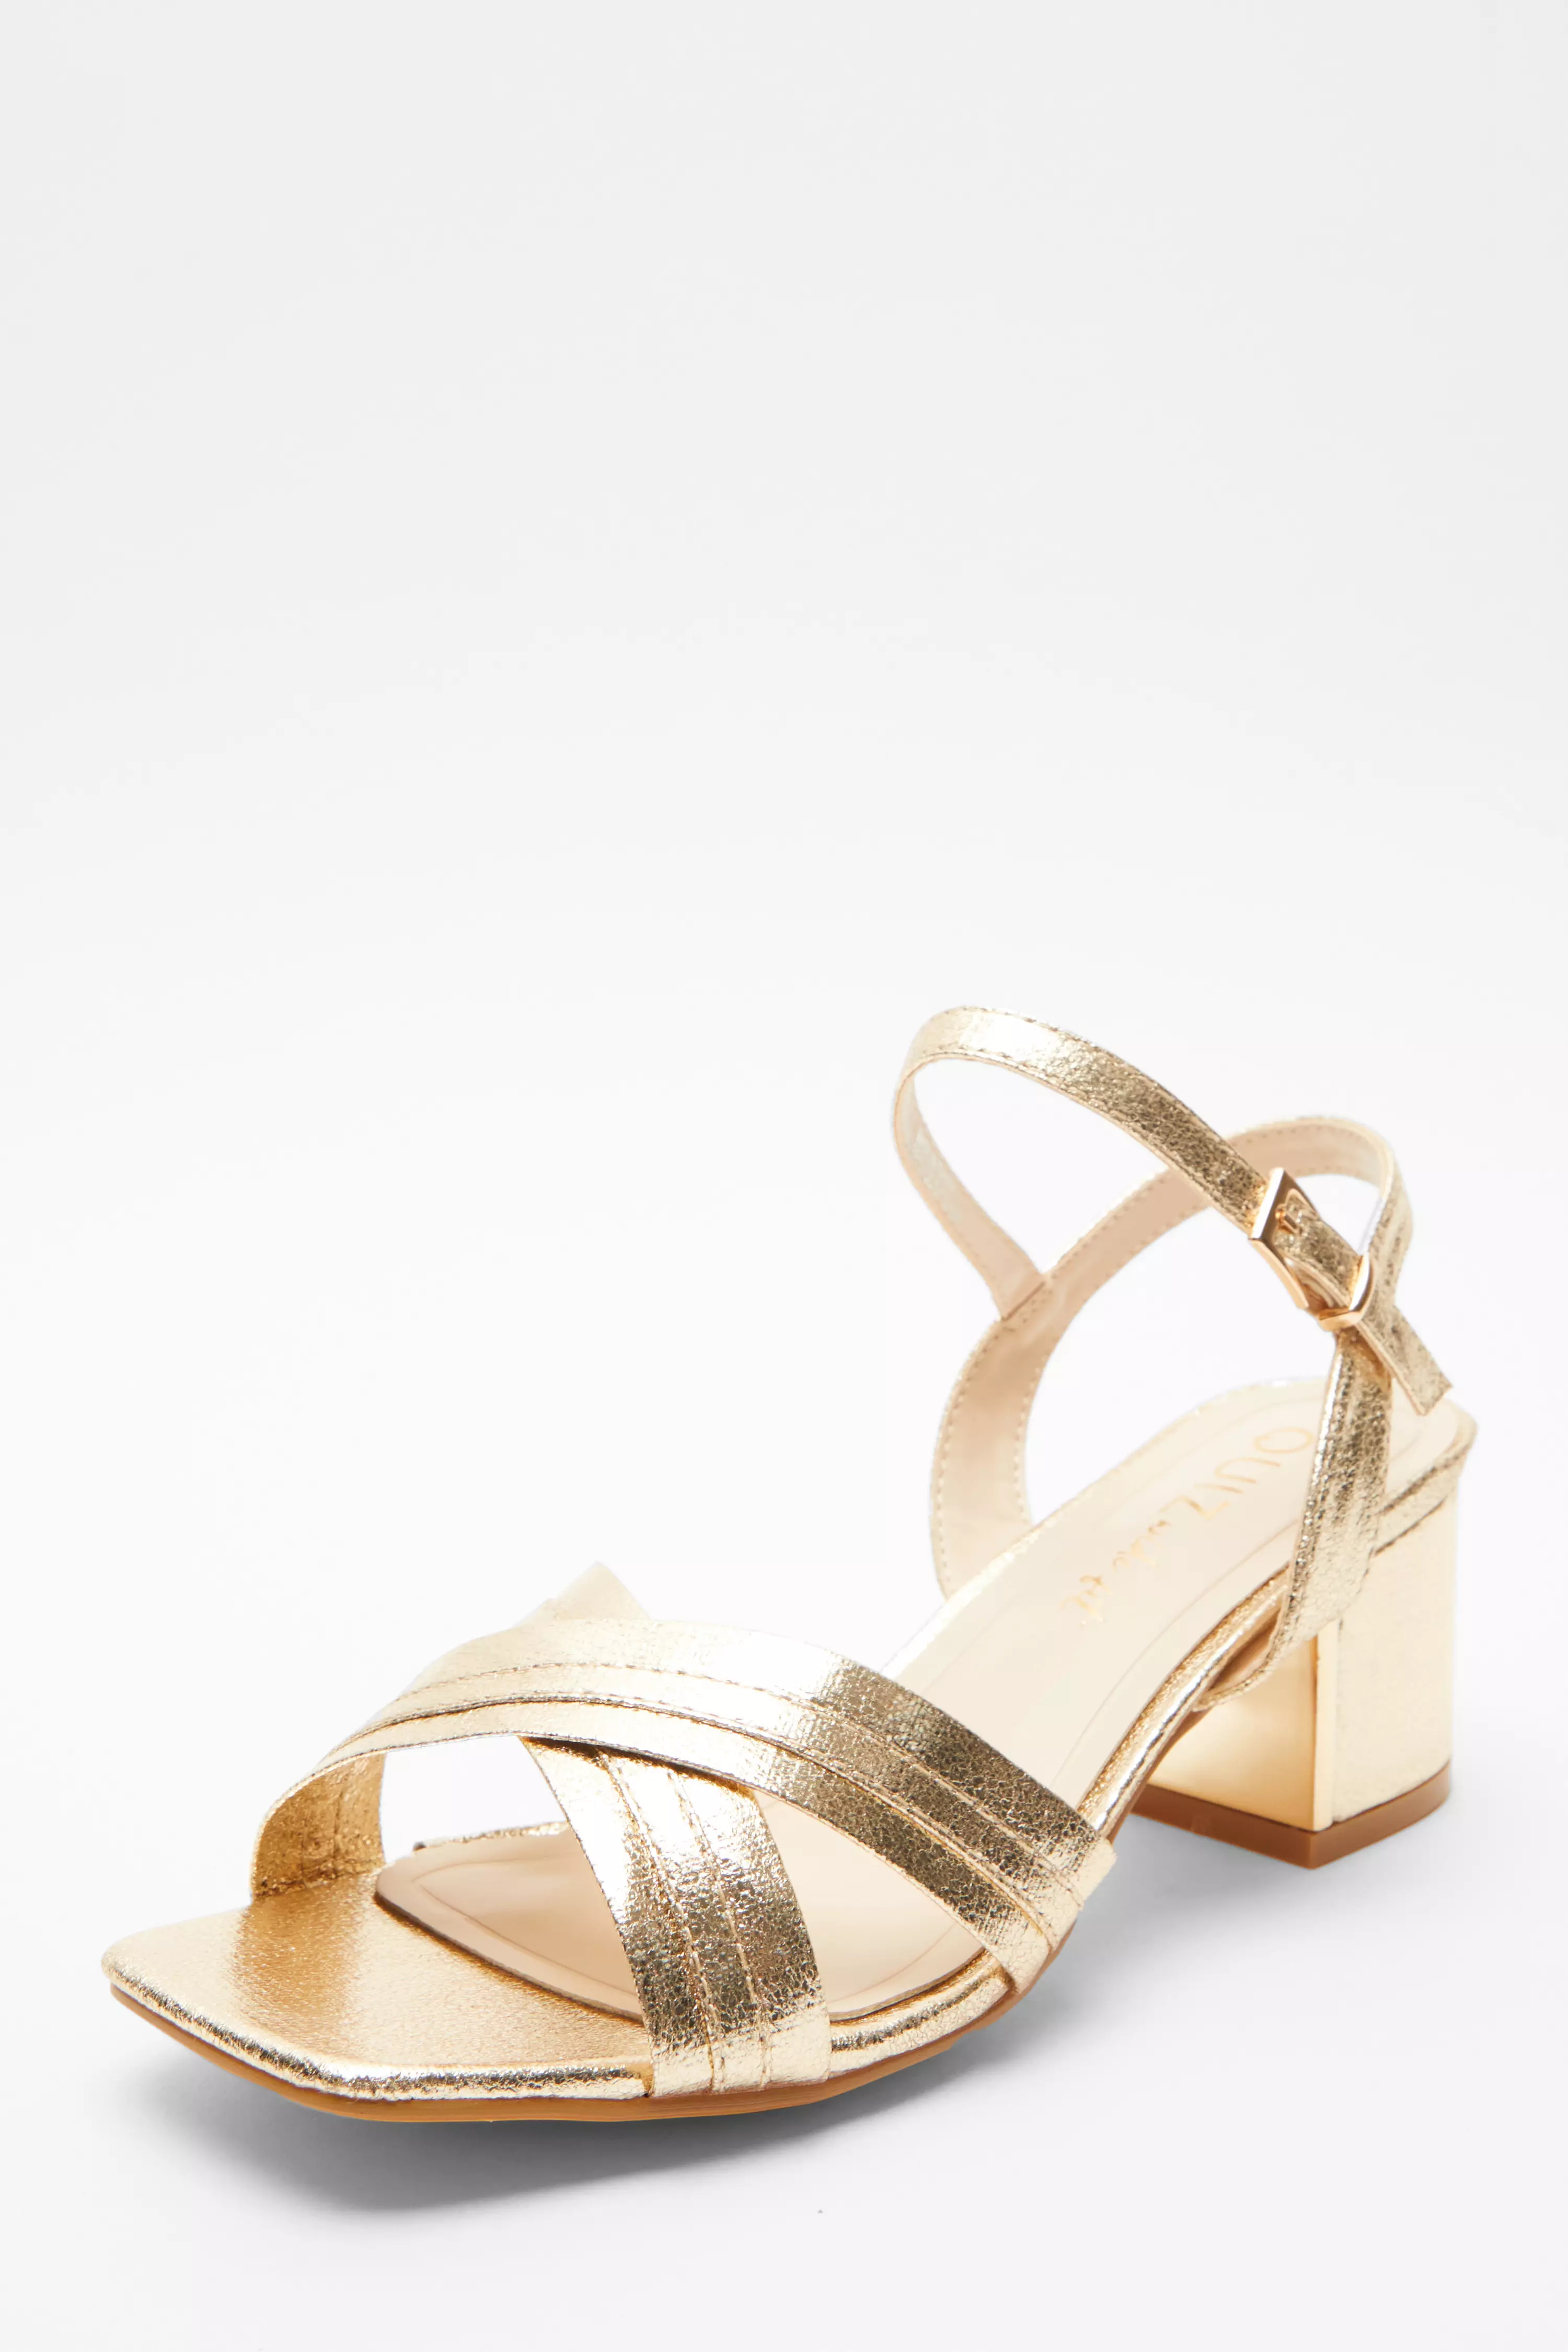 Wide Fit Gold Block Heeled Sandals - QUIZ Clothing